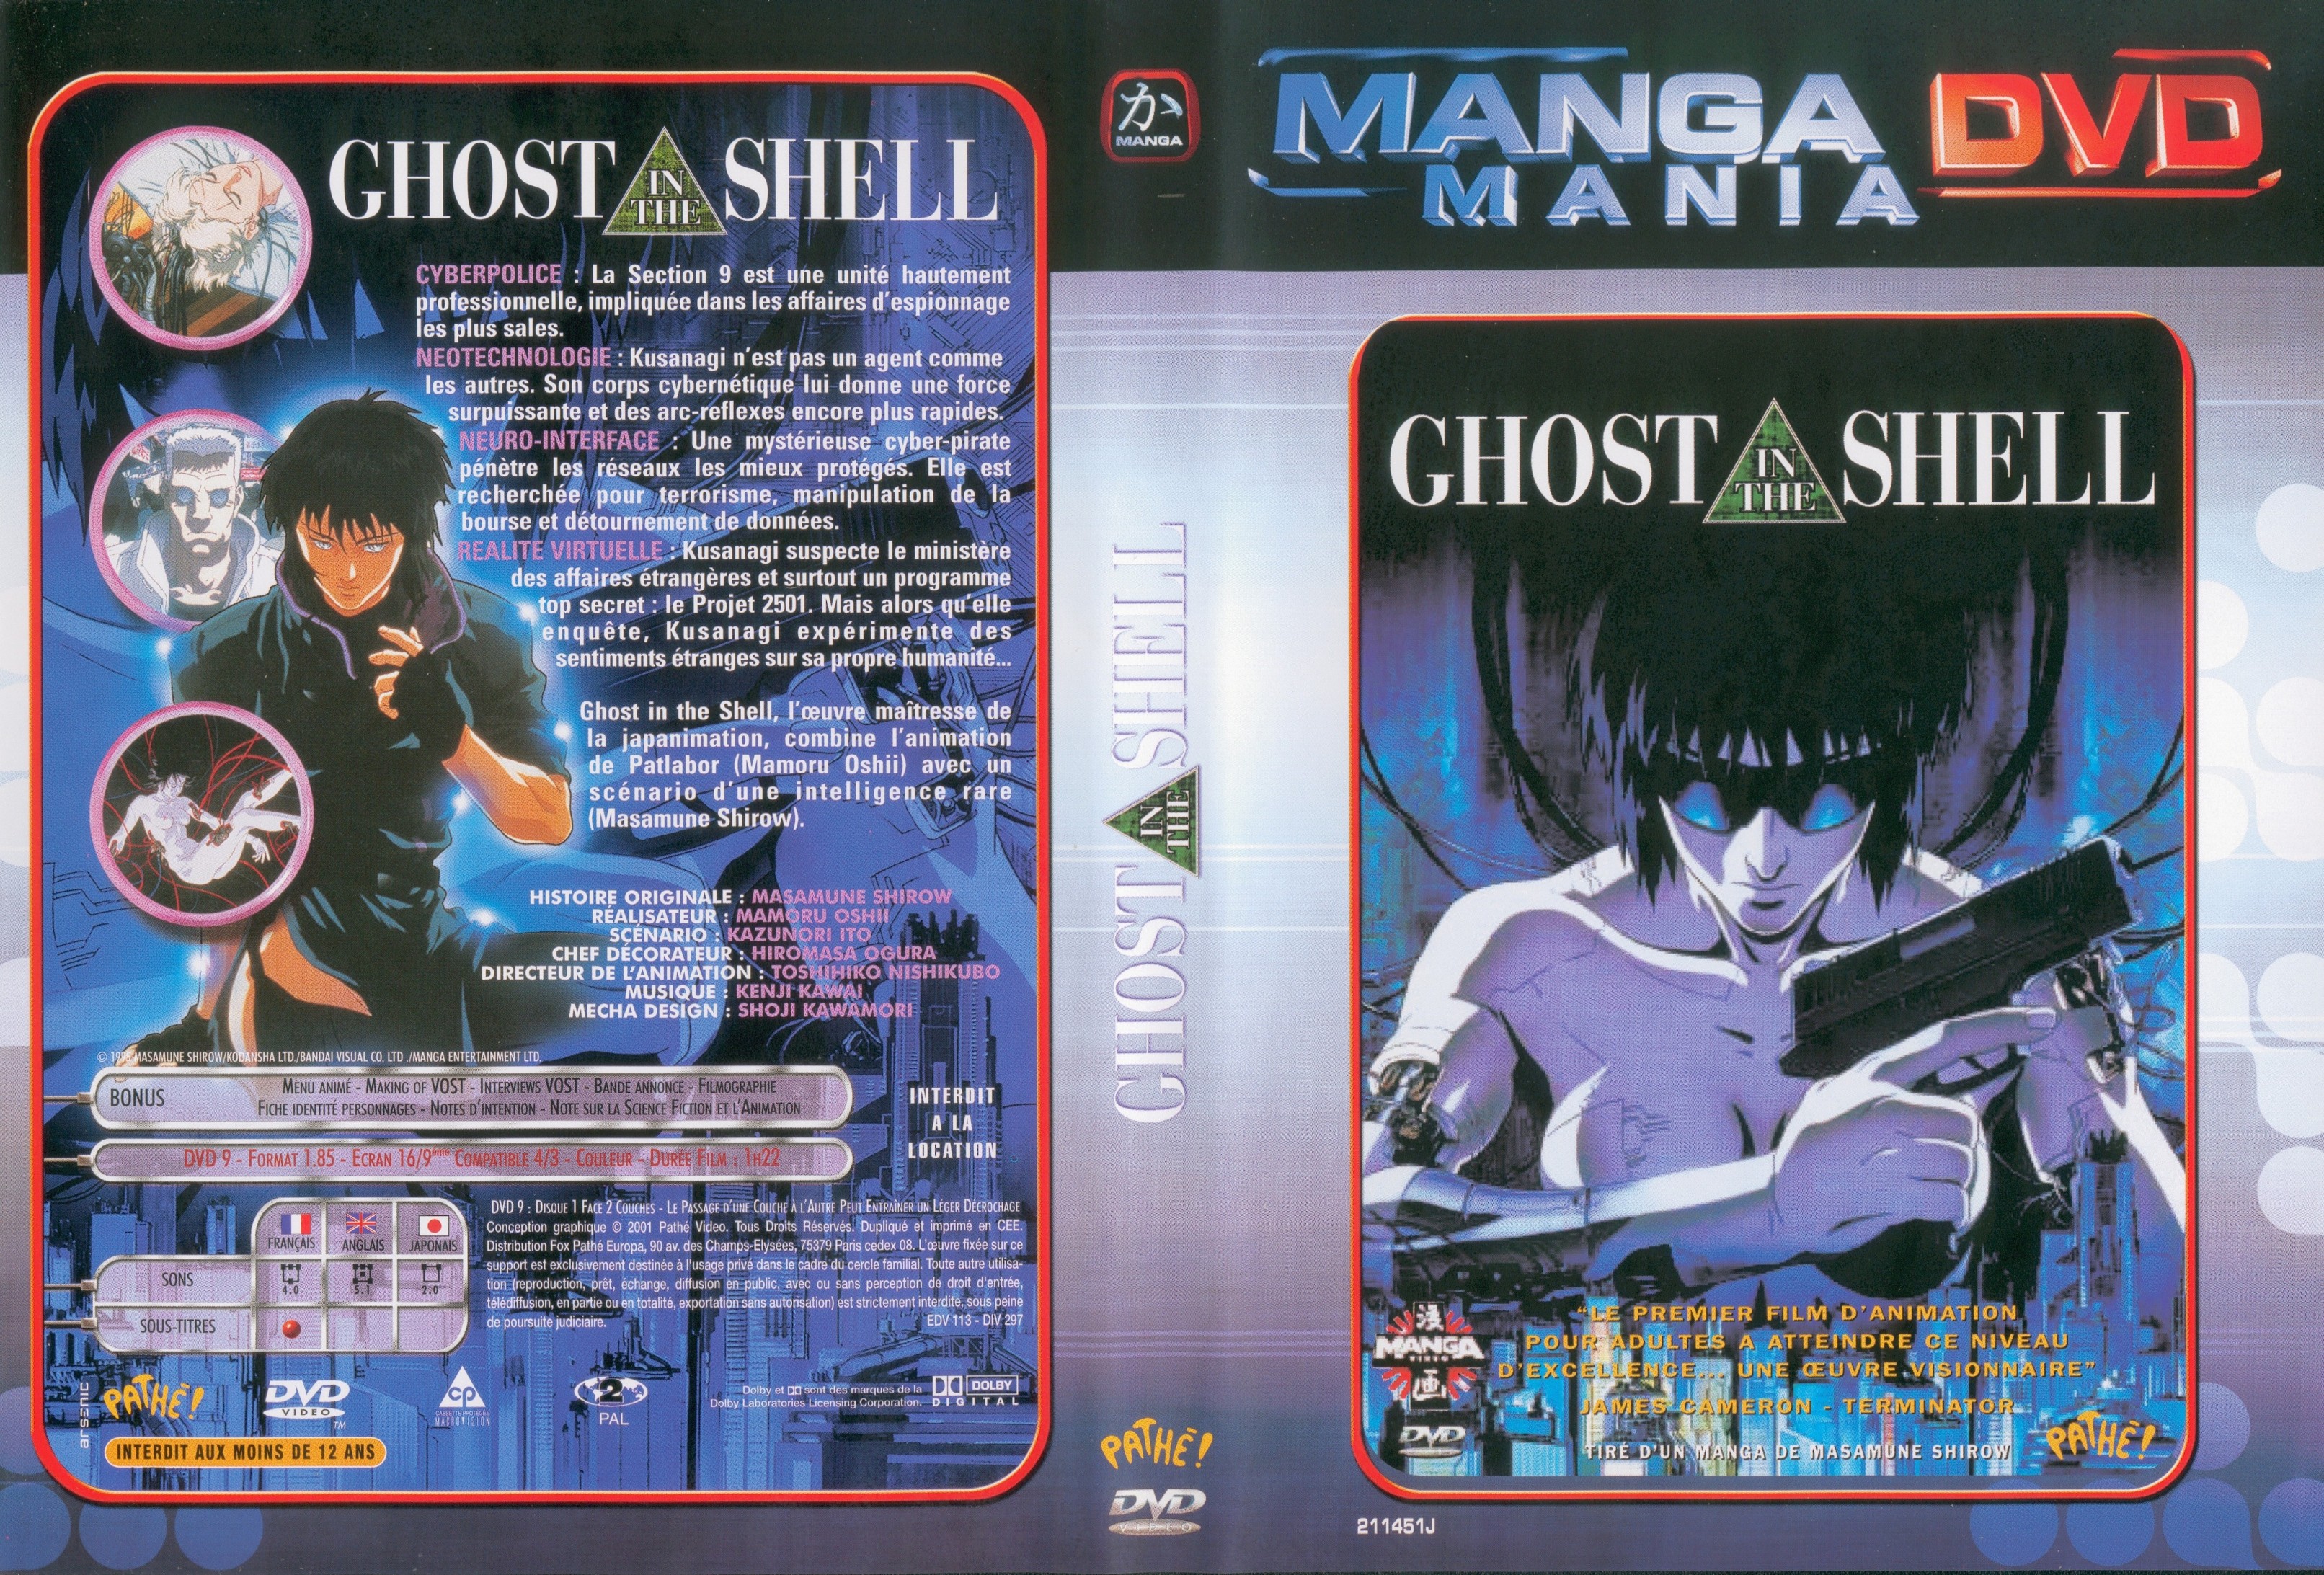 Jaquette DVD Ghost in the shell v2